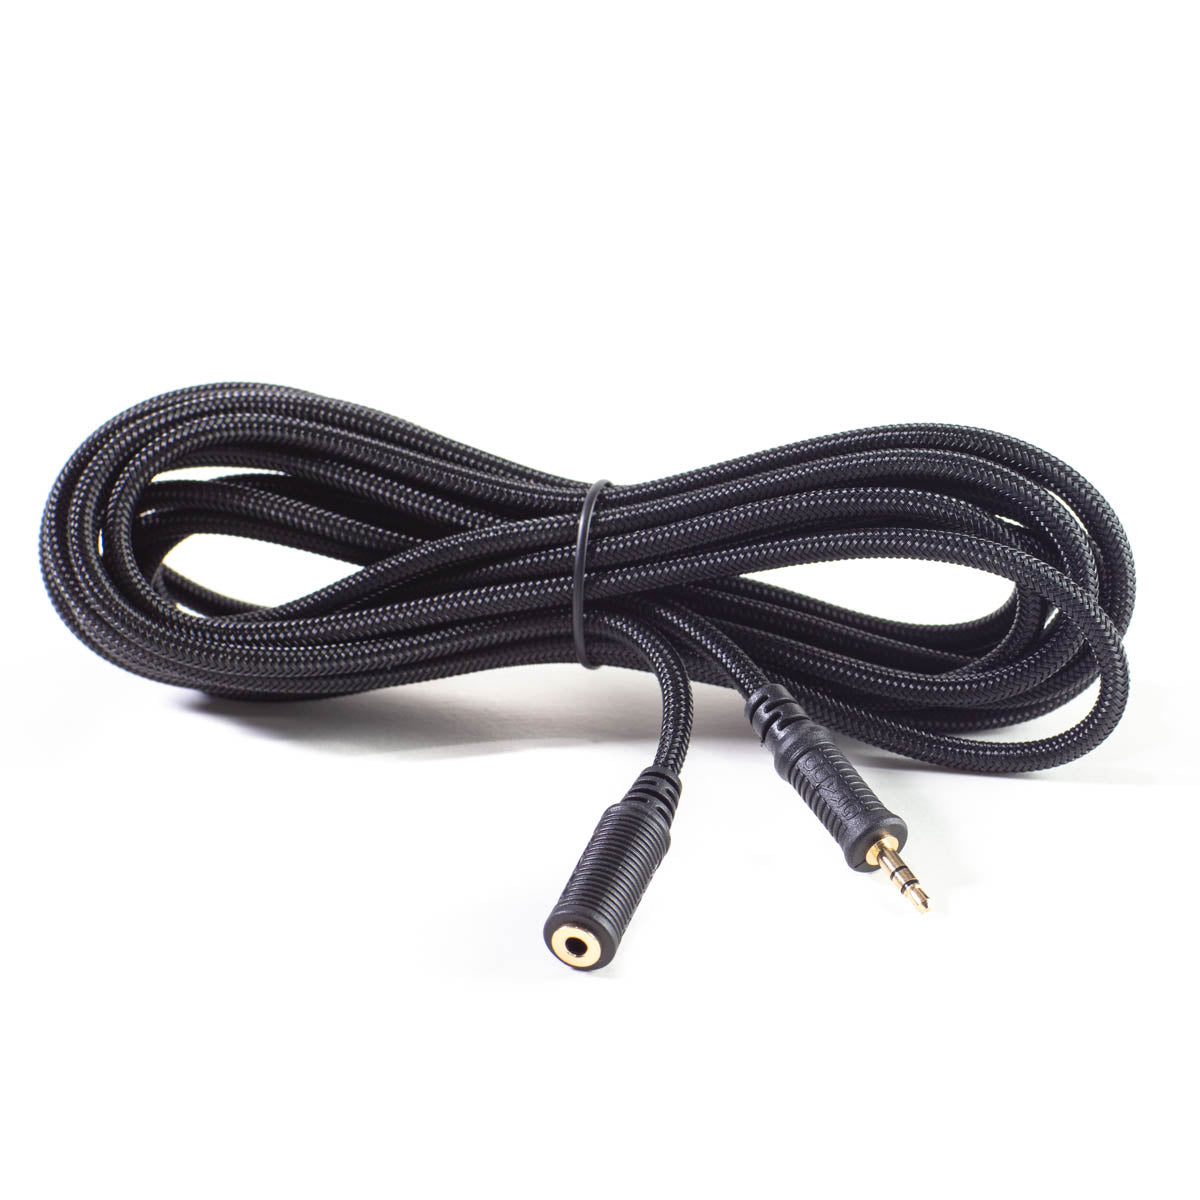 CABLE EXTENSION JACK 3.5MM A PLUG 3.5MM SAMPLES